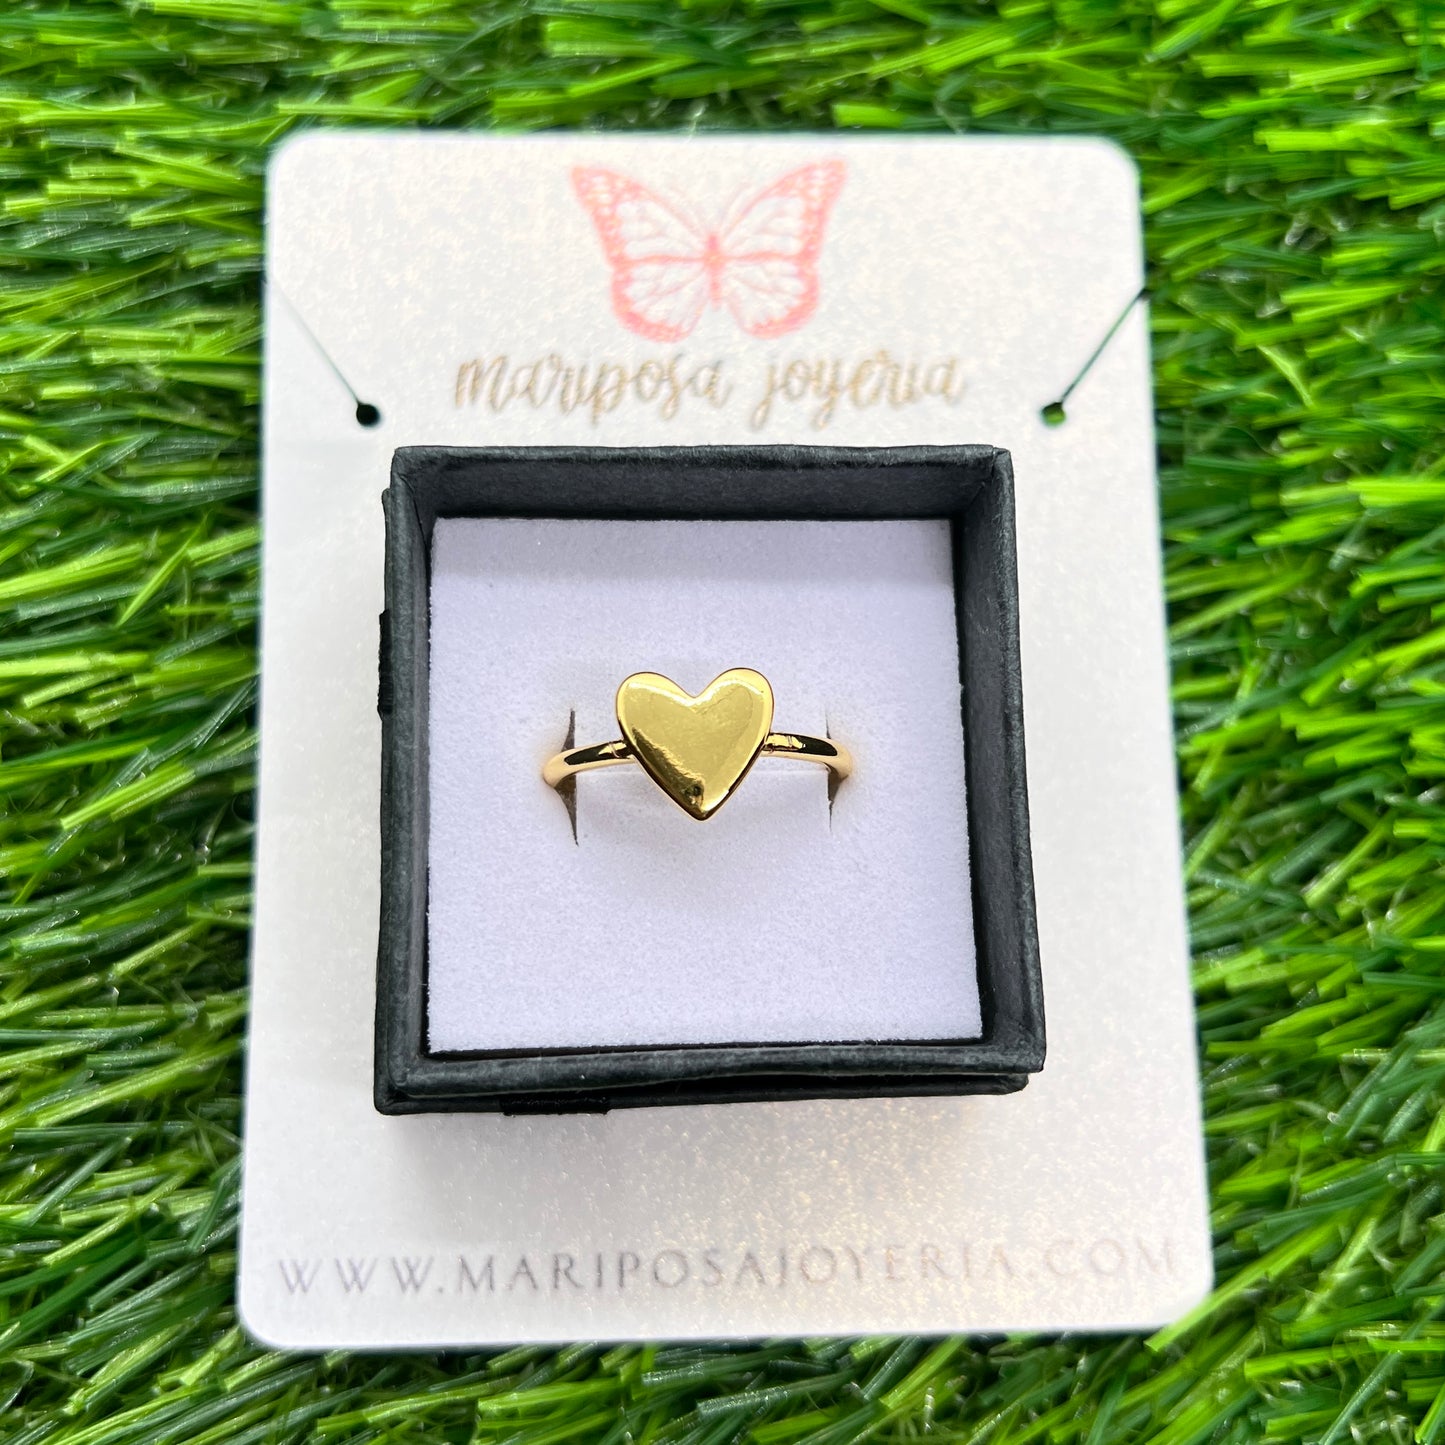 Simplicity Gold Heart Ring